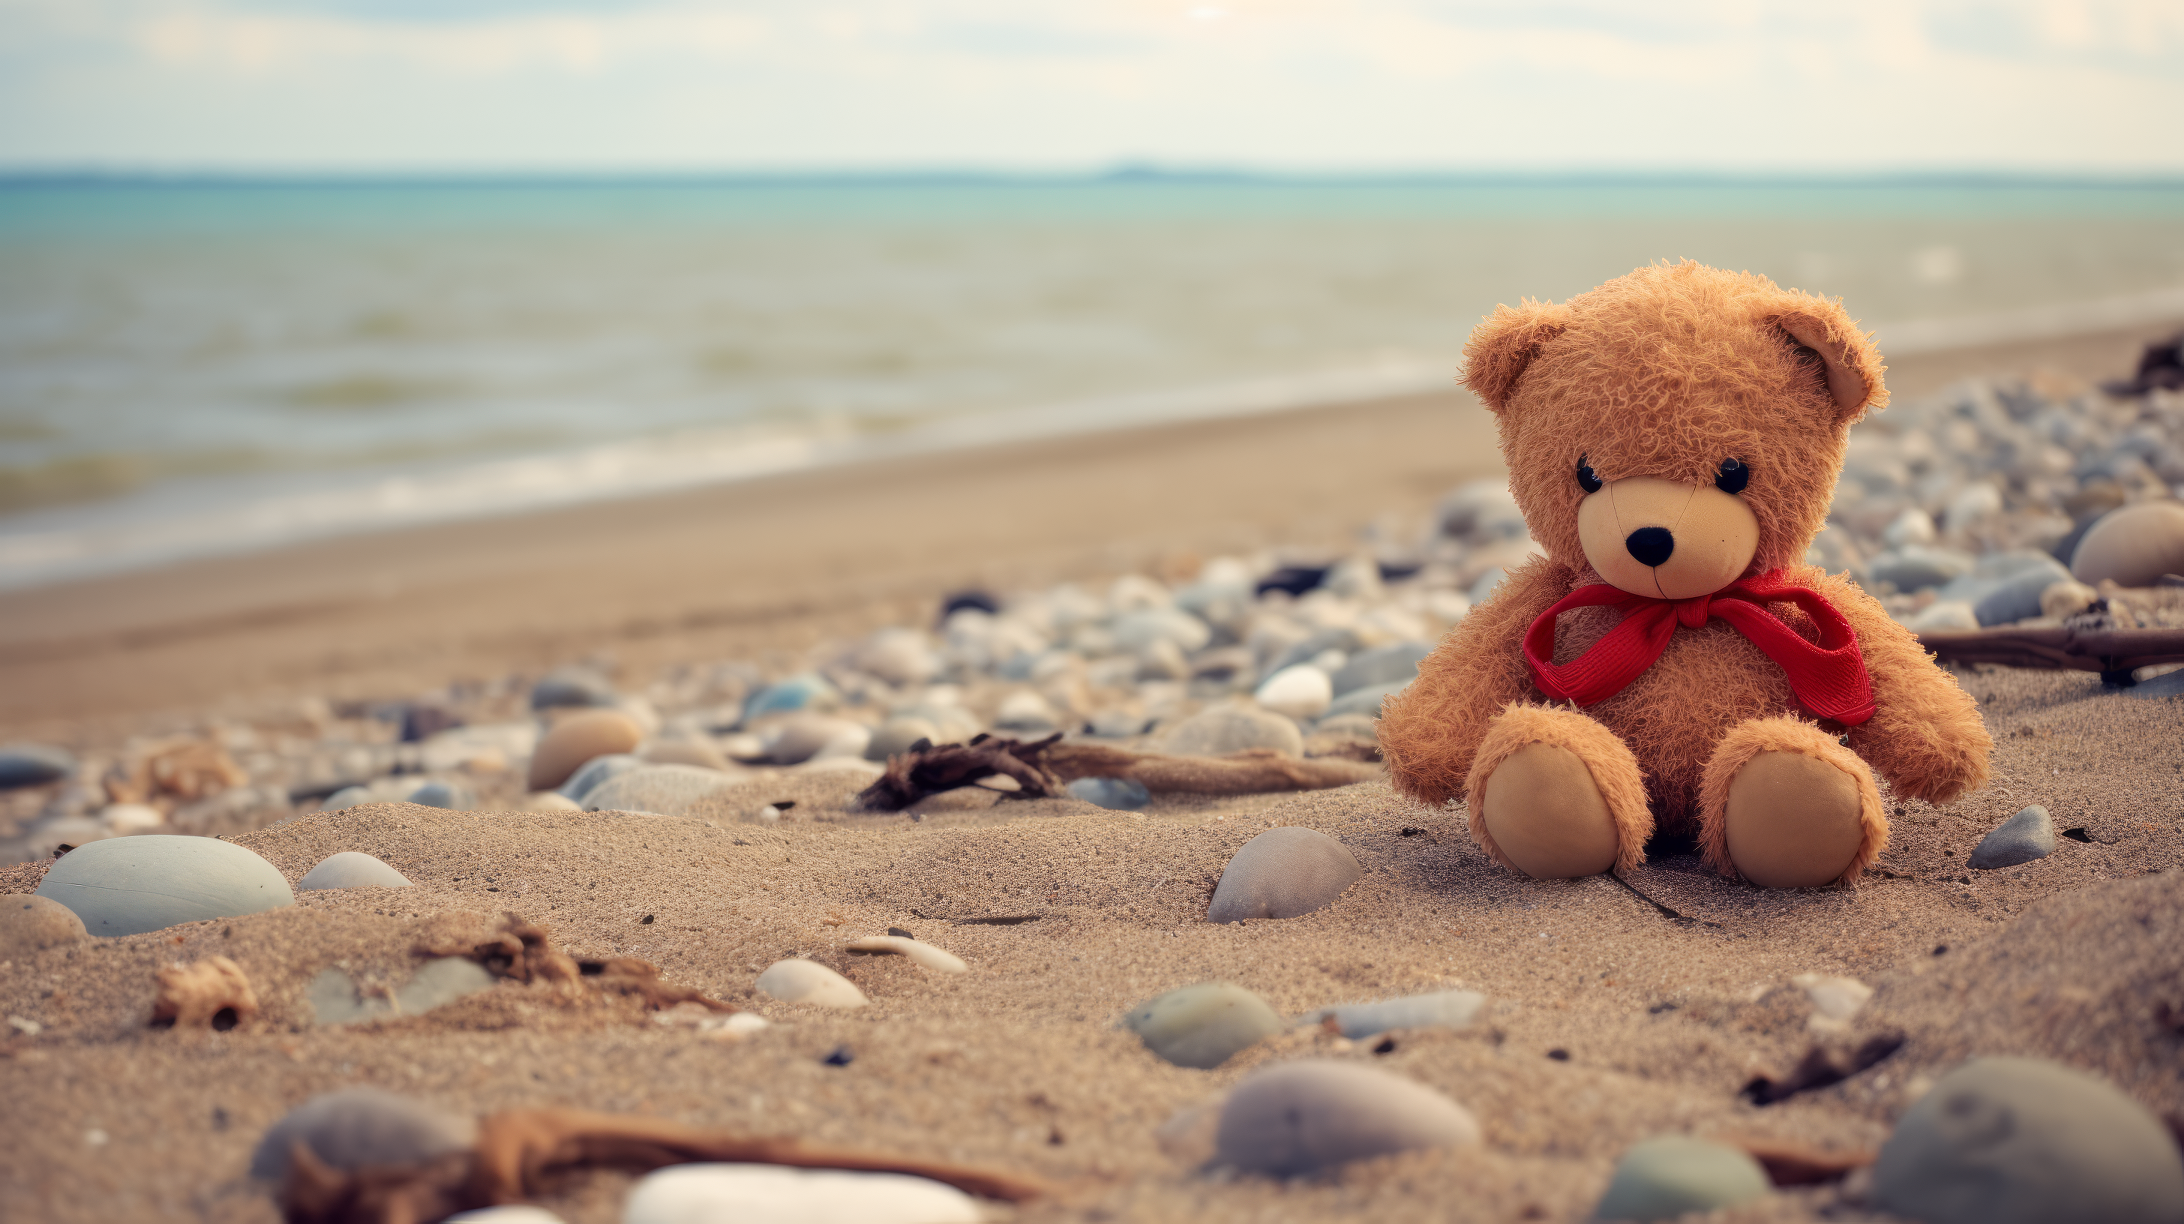 HD desktop wallpaper featuring a lonely teddy bear with a red bow sitting on a sandy beach surrounded by pebbles, with waves in the background.